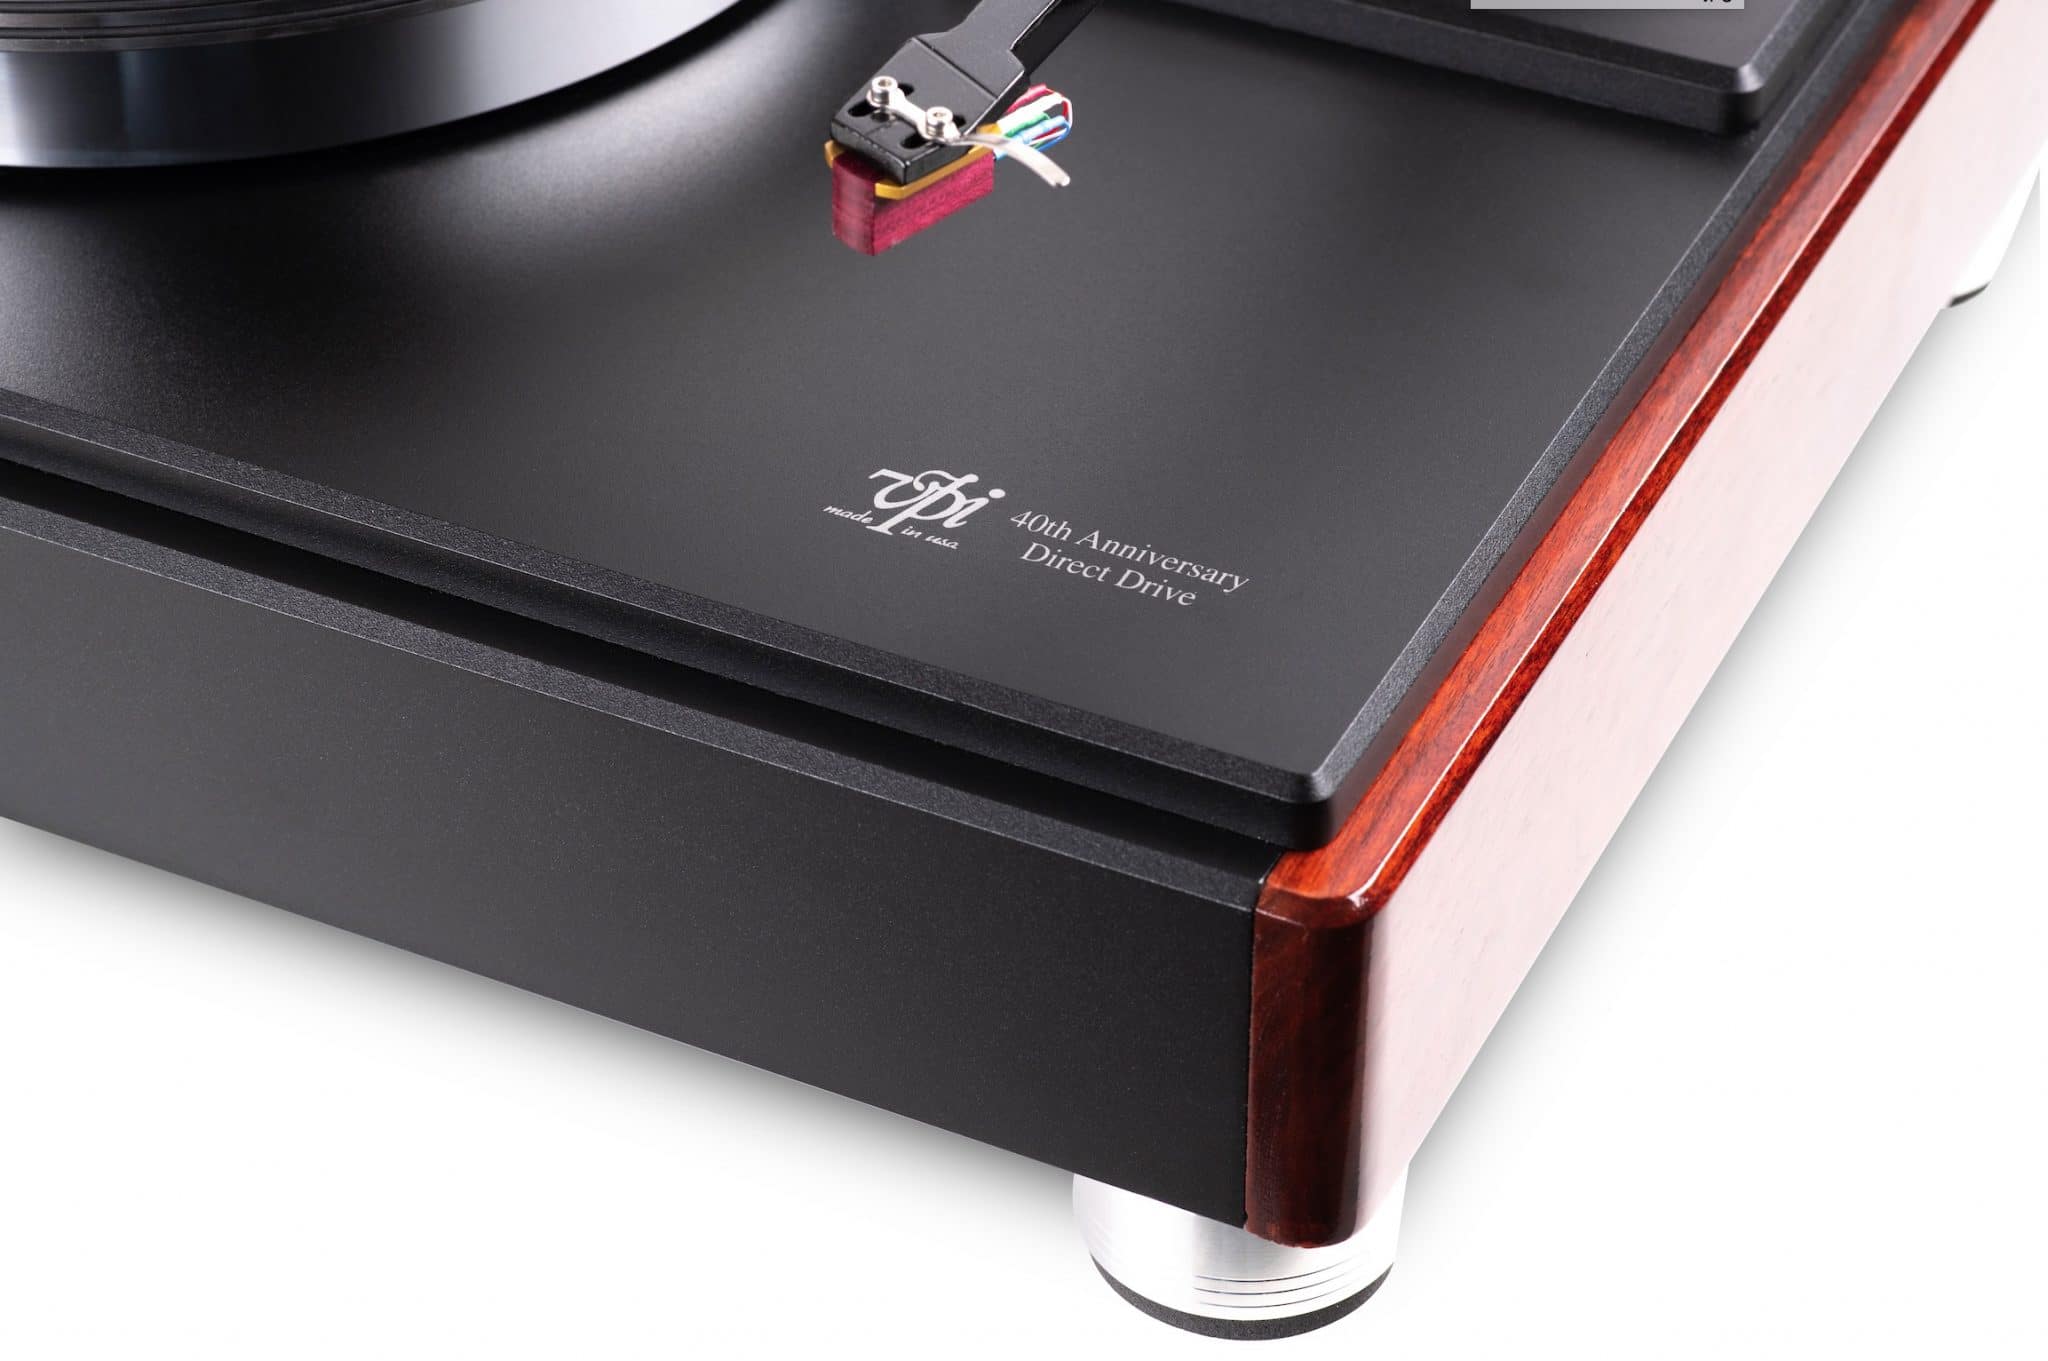 Direct Drive Turntable Review